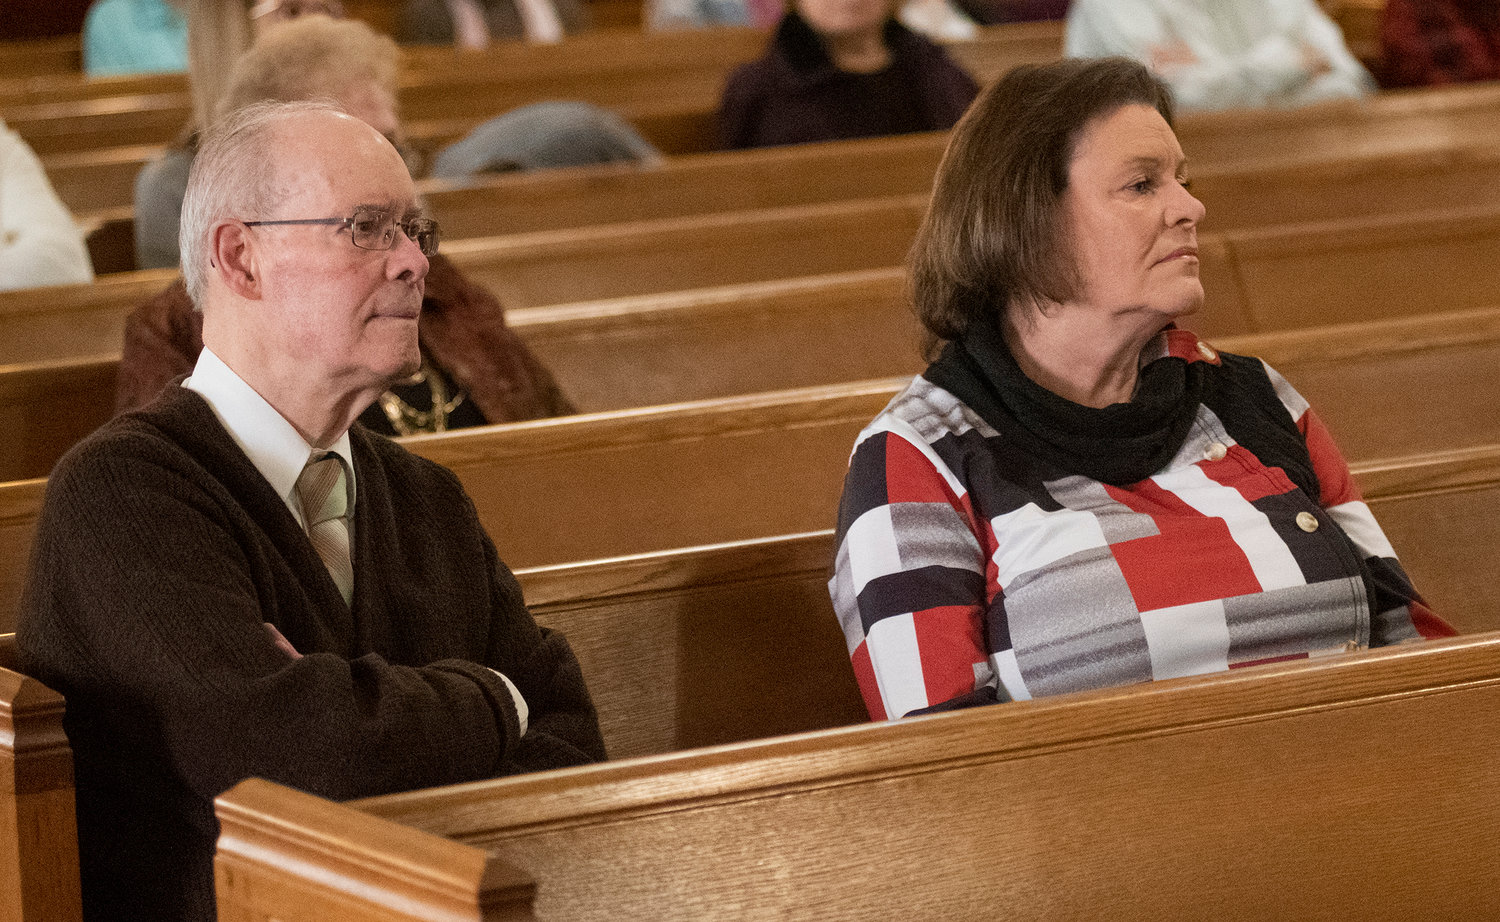 READY FOR MOVE — Jon Glover, left, sits with Joni Dennie of Gloversville during a lenten cantata at Foothills United Church, 17 Freemont St., in Gloversville, on Sunday.